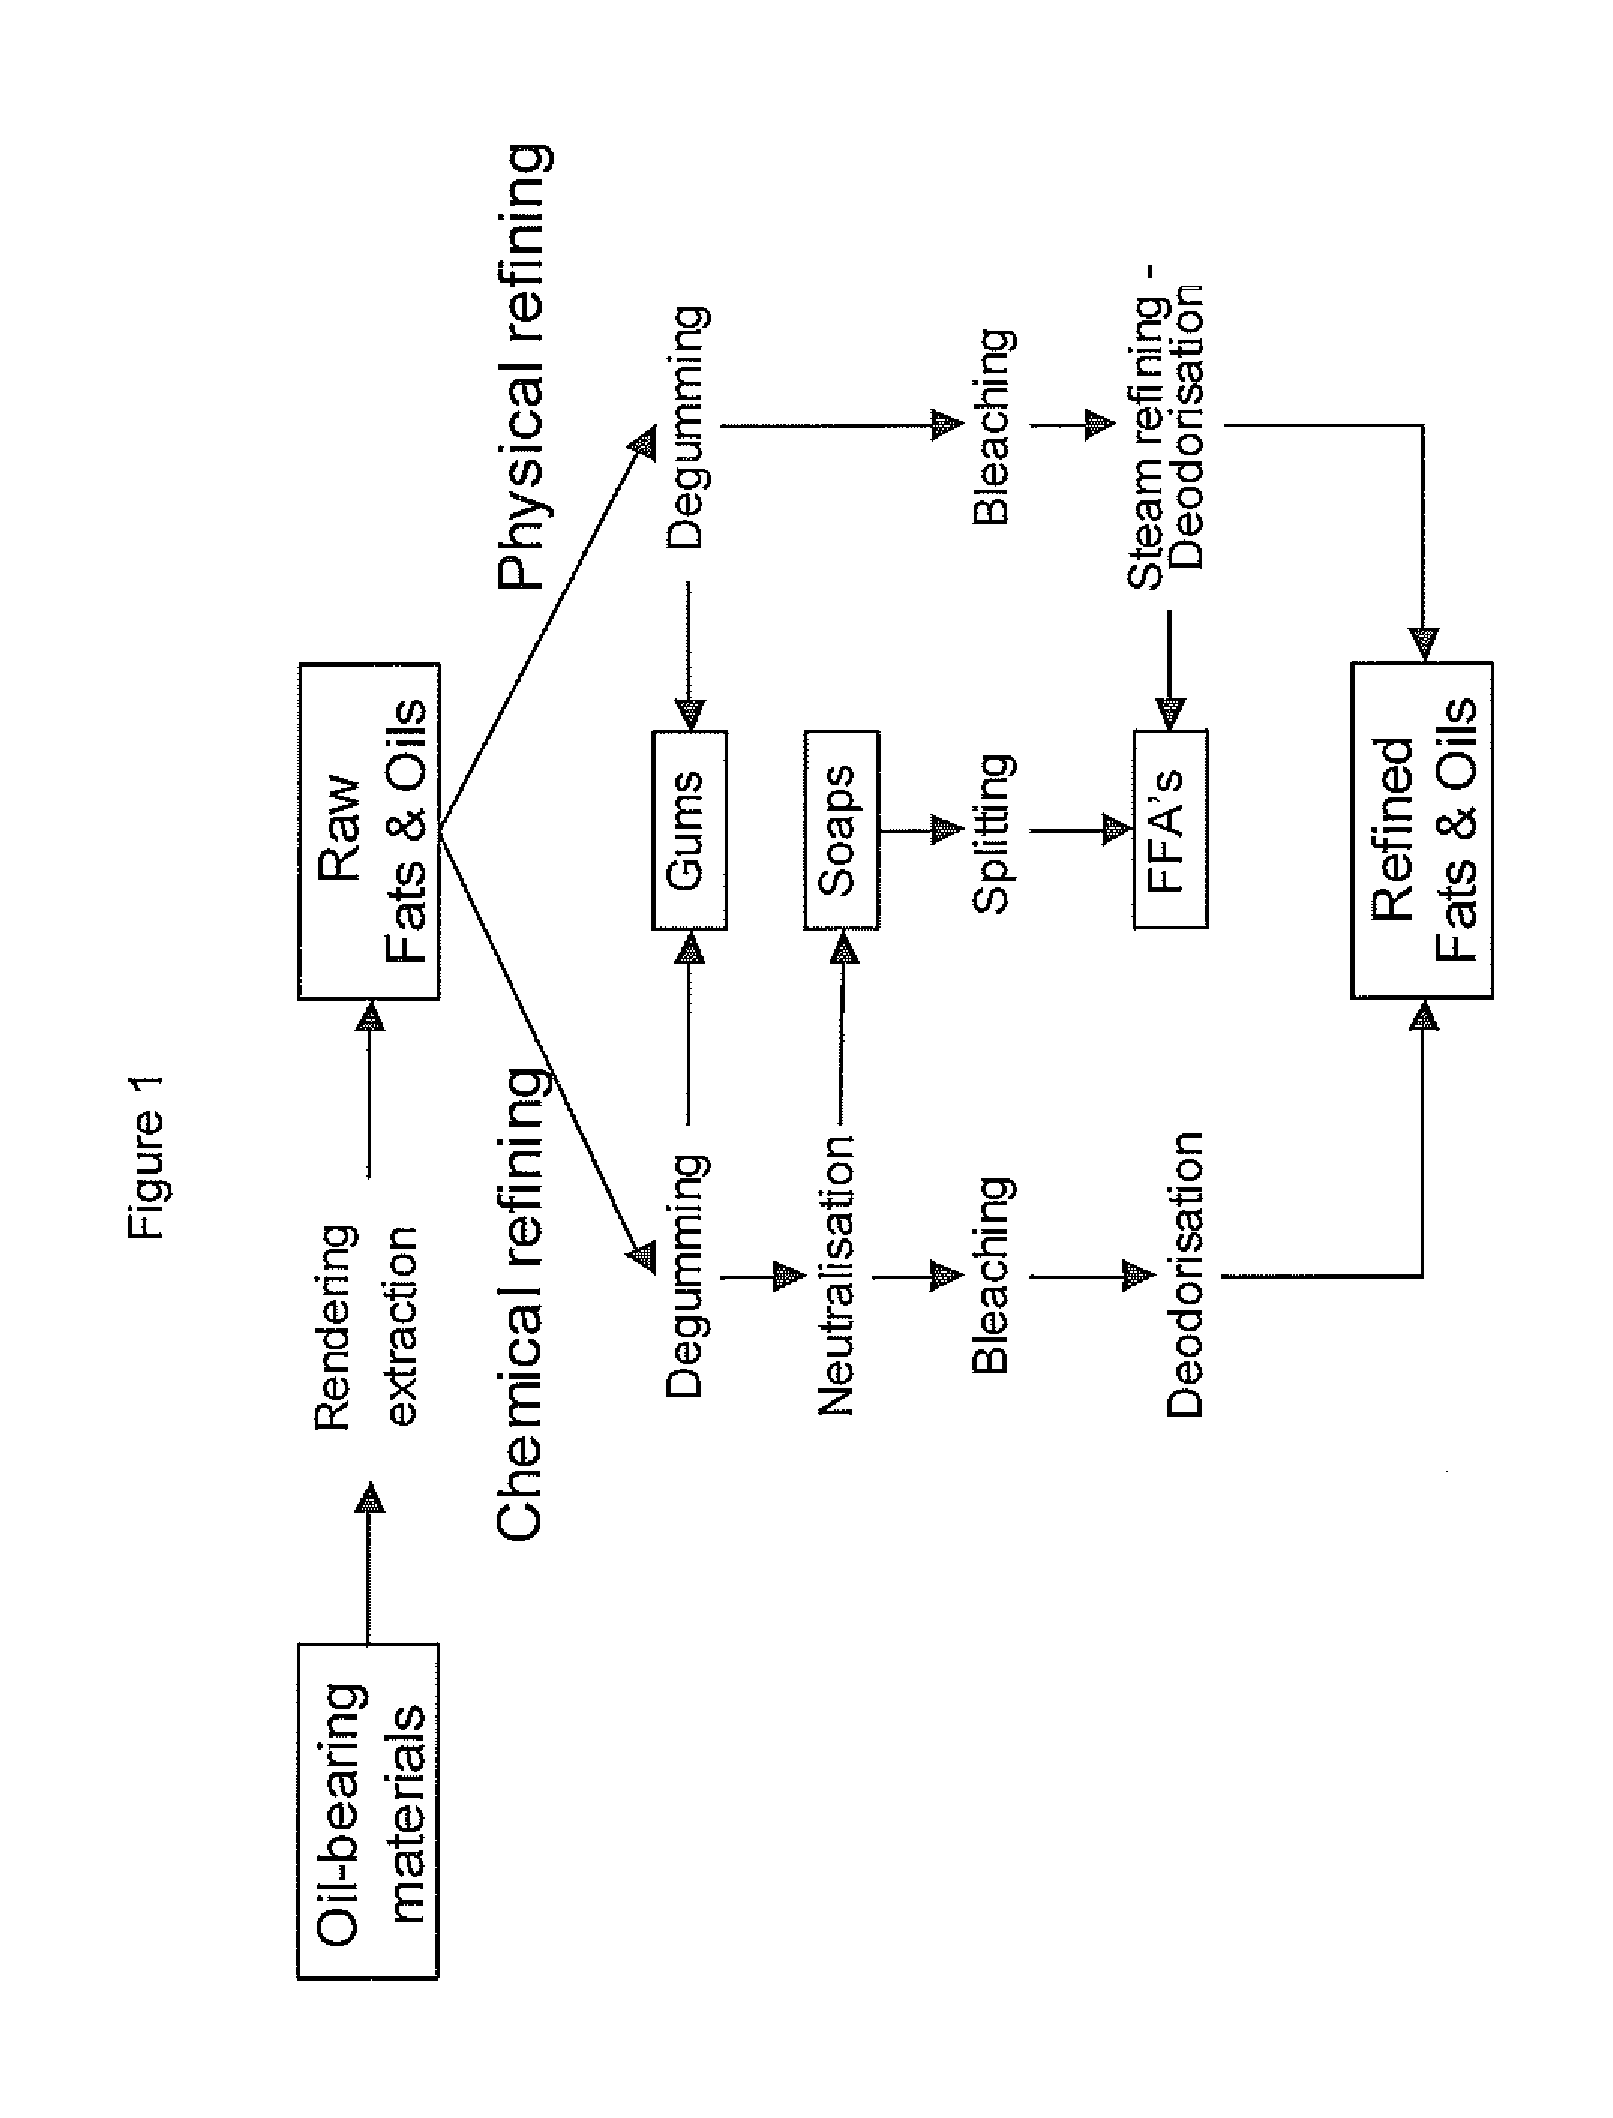 Process for the production of bio-naphtha from complex mixtures of natural occurring fats and oils